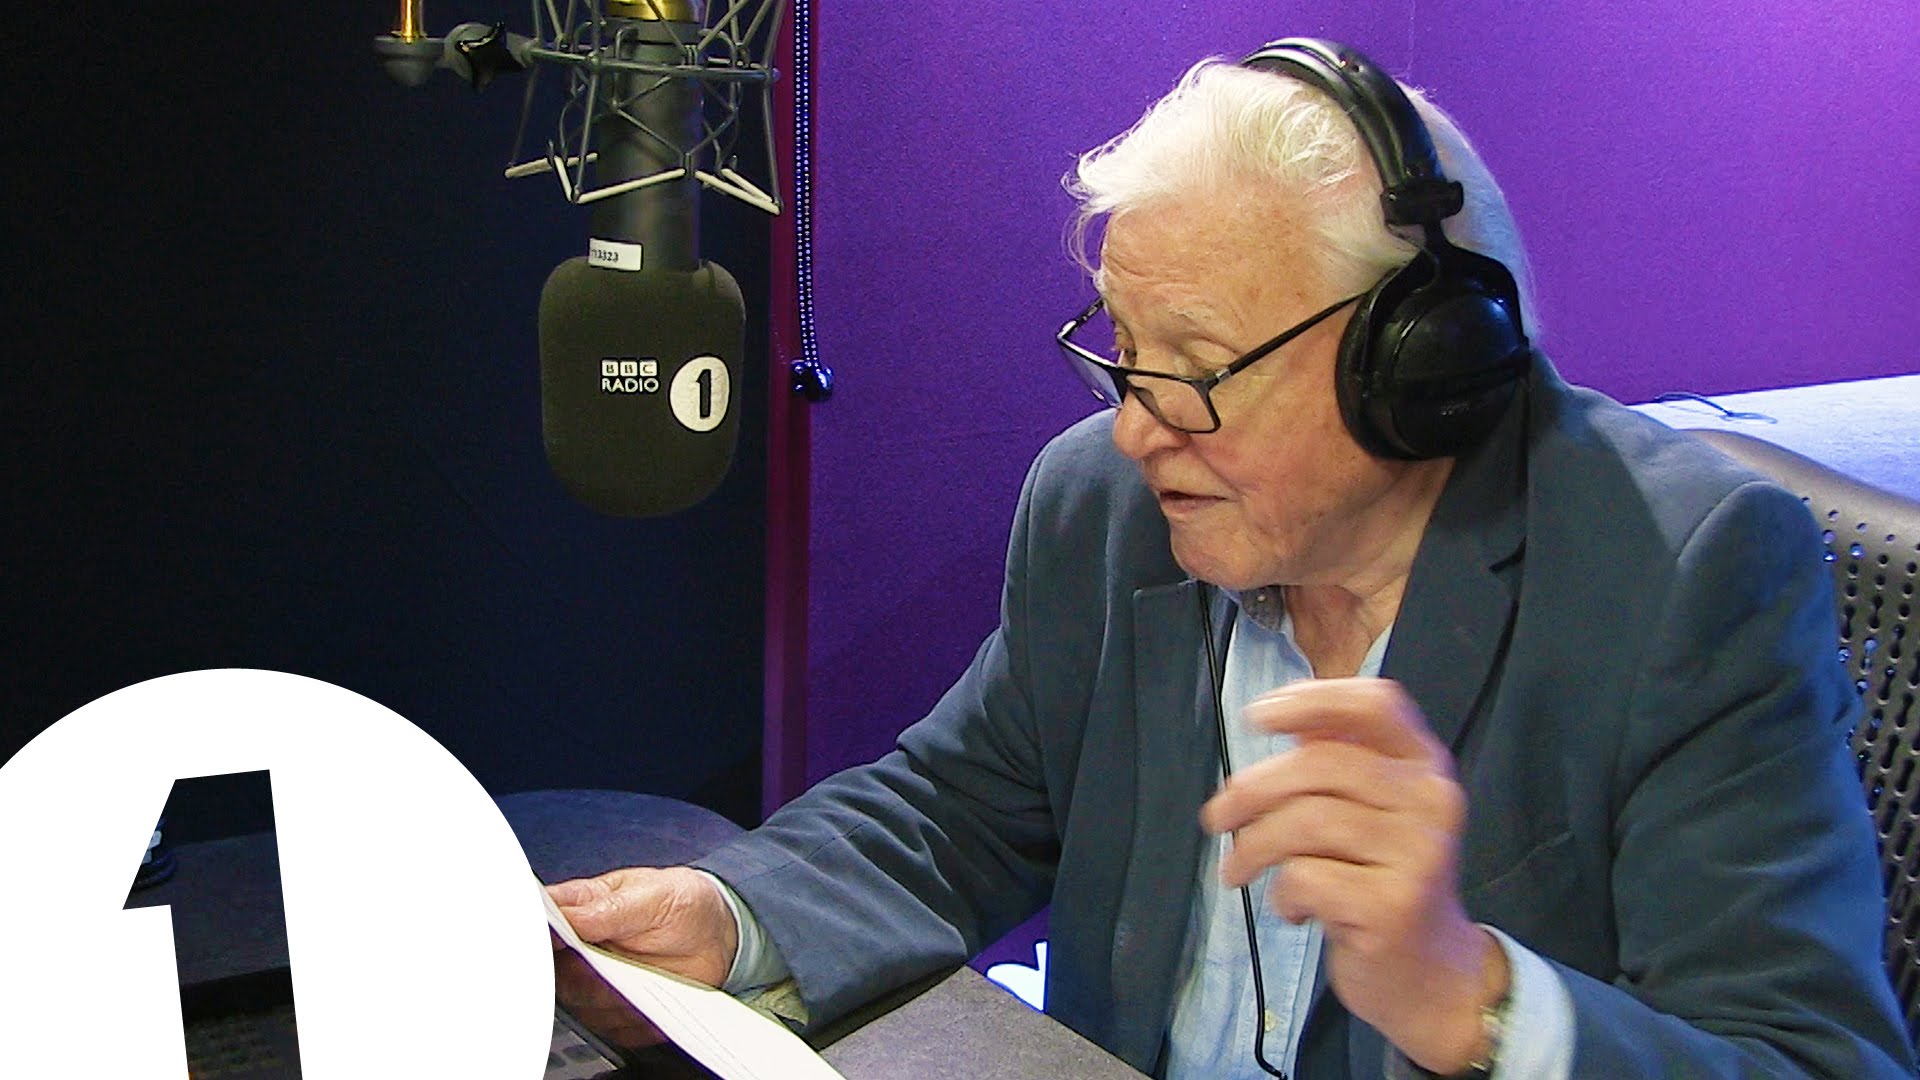 Adele’s Hello narrated by Sir David Attenborough